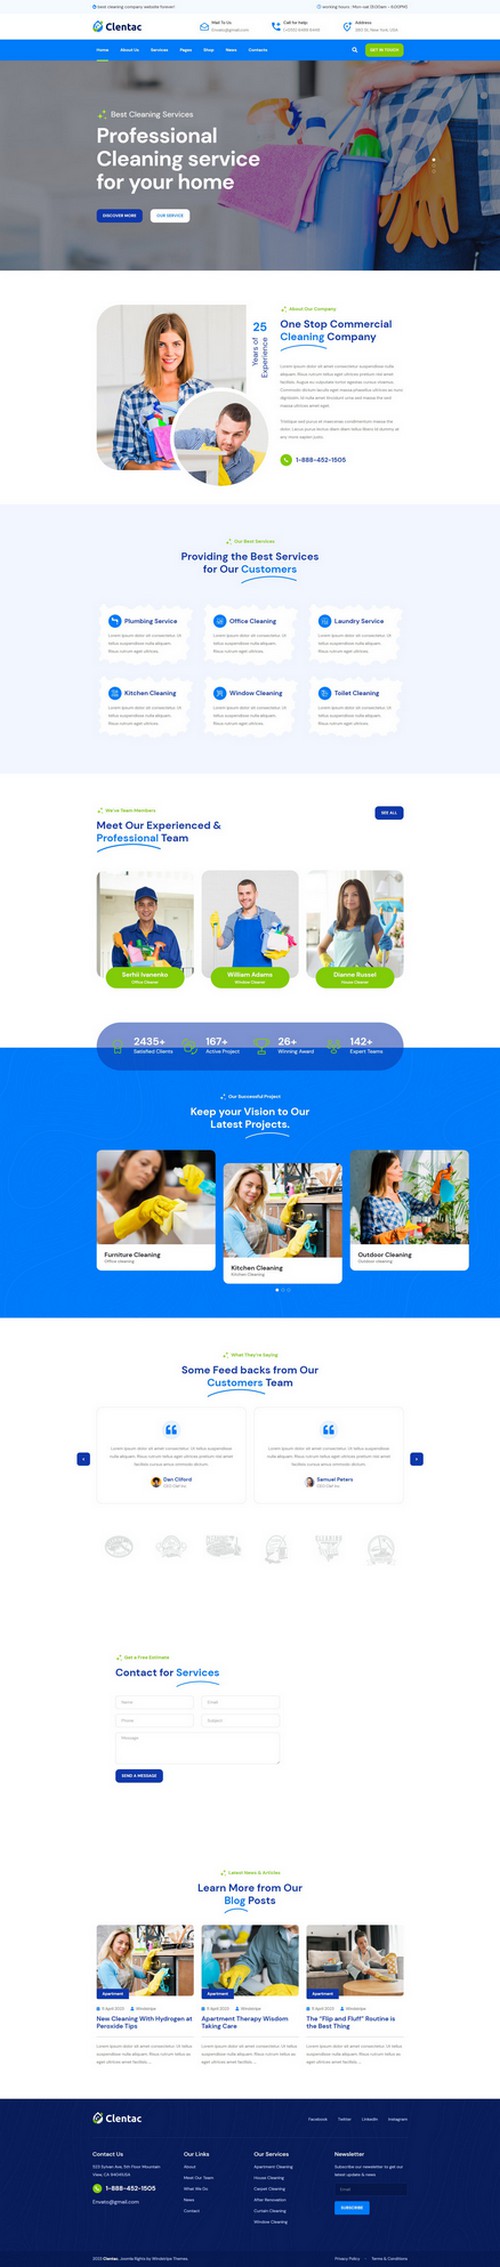 Clentac - Responsive Cleaning Services Joomla 4 Template